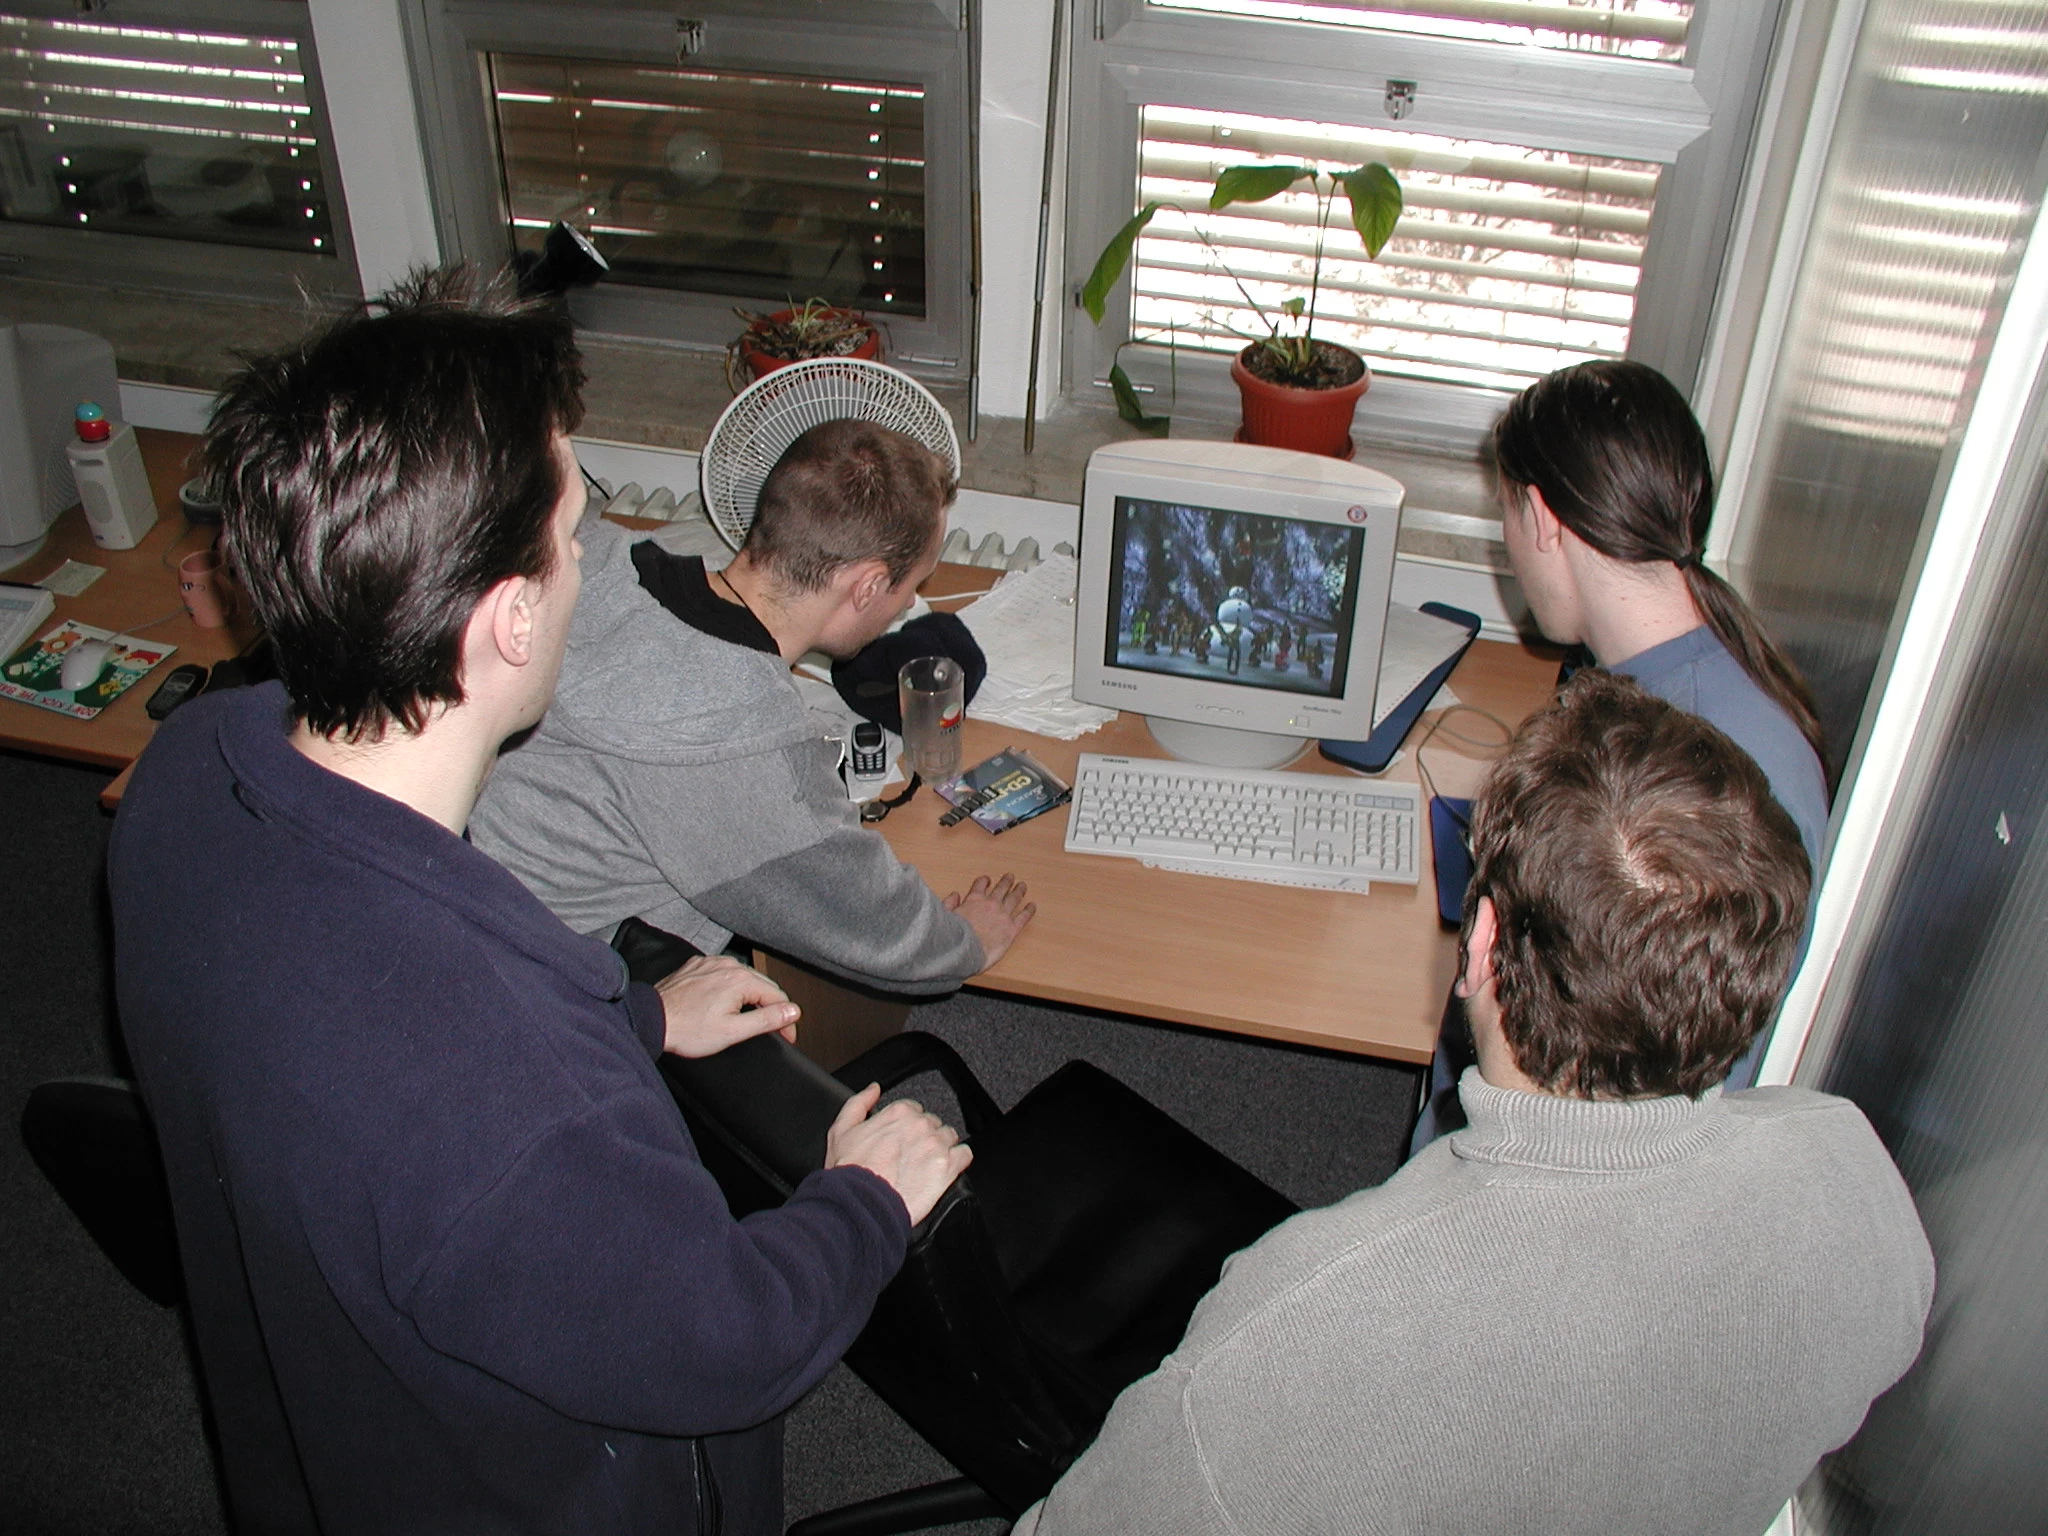 Team photo of the developers of the game Serious Sam: The Second Encounter